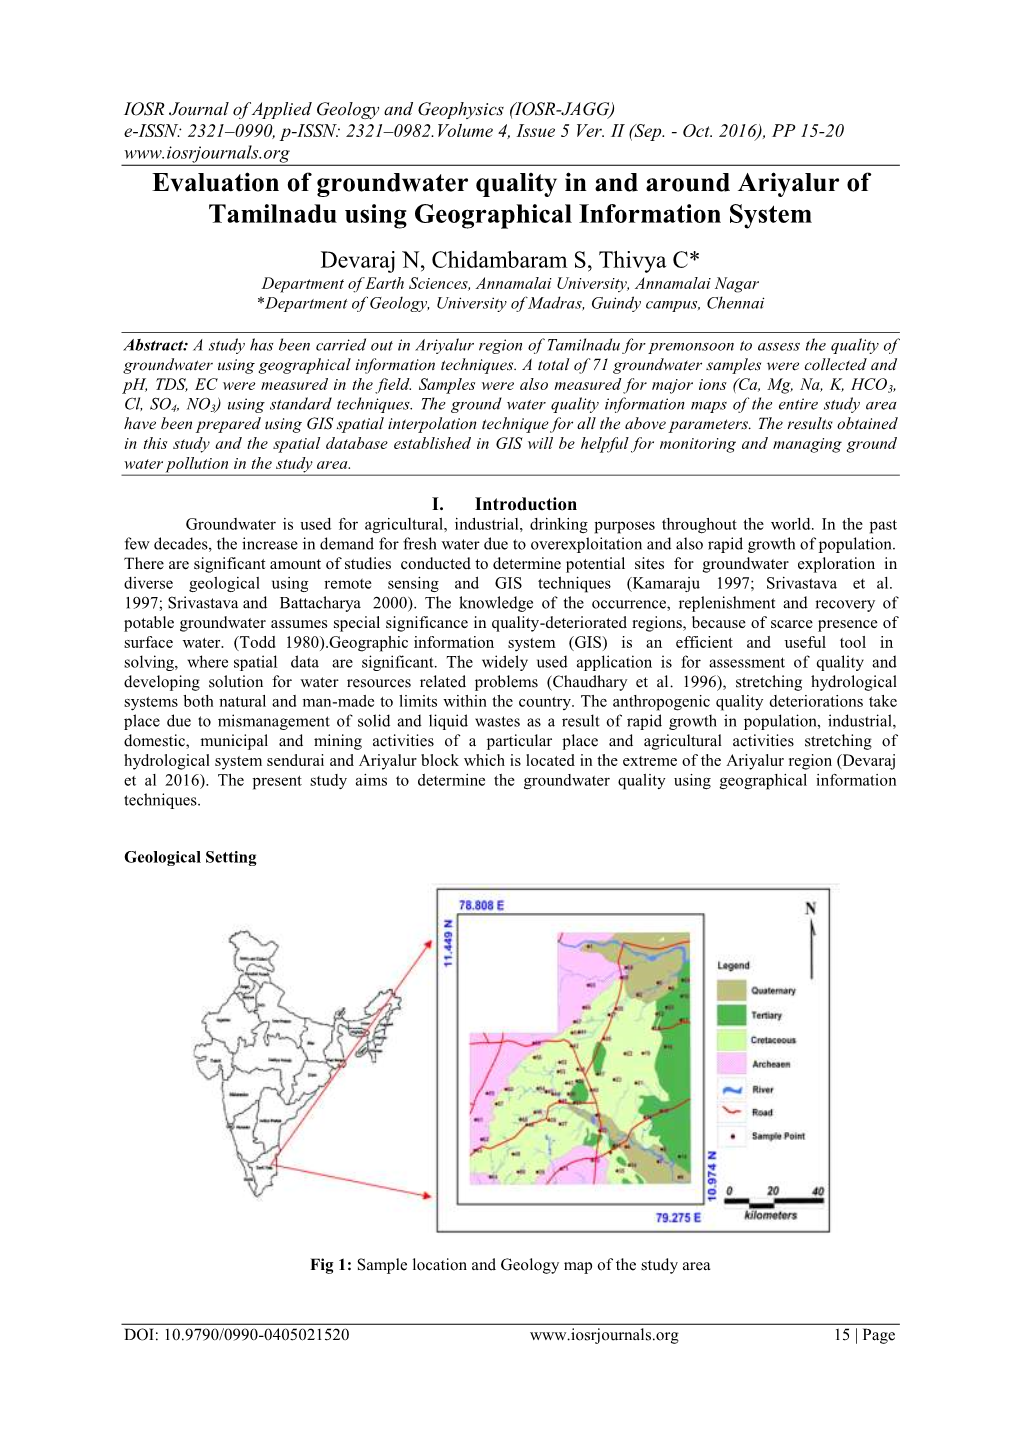 Evaluation of Groundwater Quality in and Around Ariyalur of Tamilnadu Using Geographical Information System